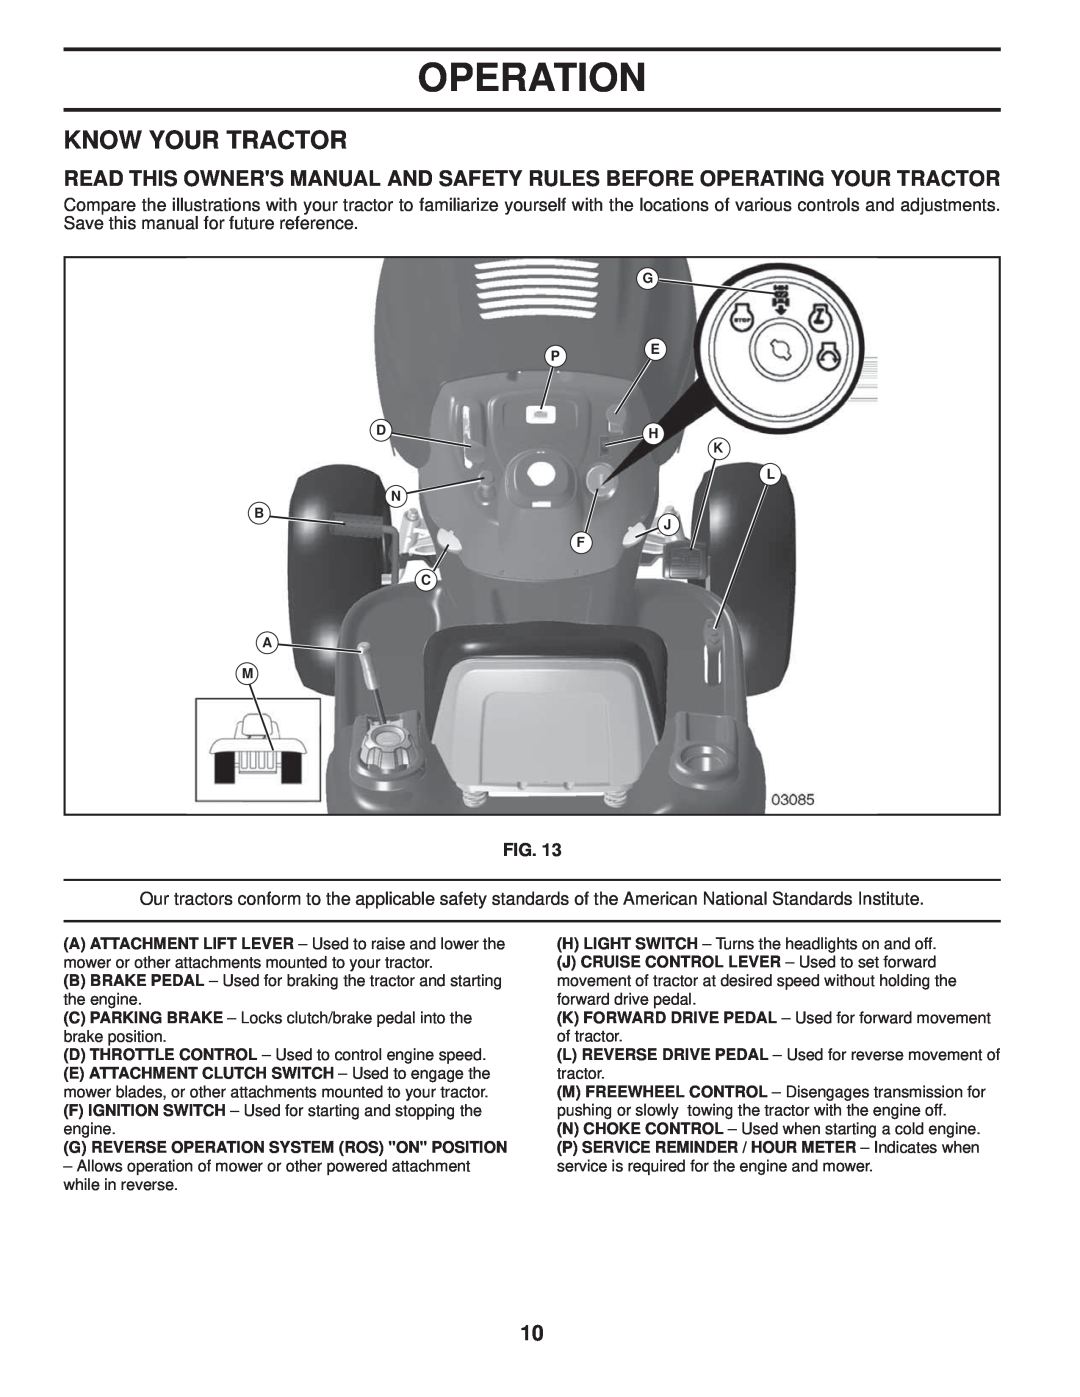 Poulan PB24H54YT manual Know Your Tractor, G Reverse Operation System Ros On Position 